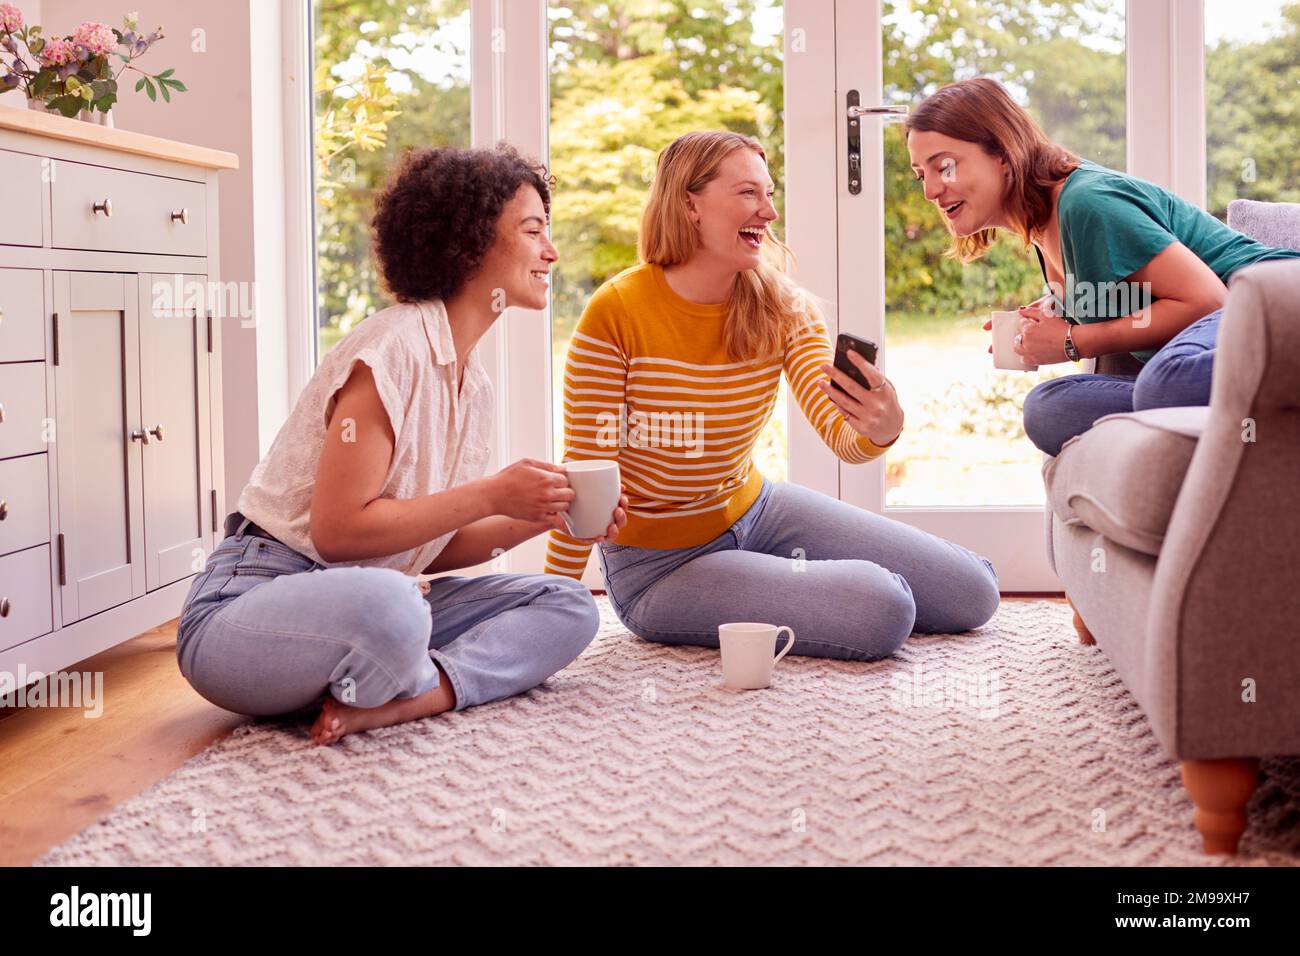 Group Of Female Friends Relaxing At On Sofa At Home Looking At Mobile Phone And Drinking Coffee Stock Photo